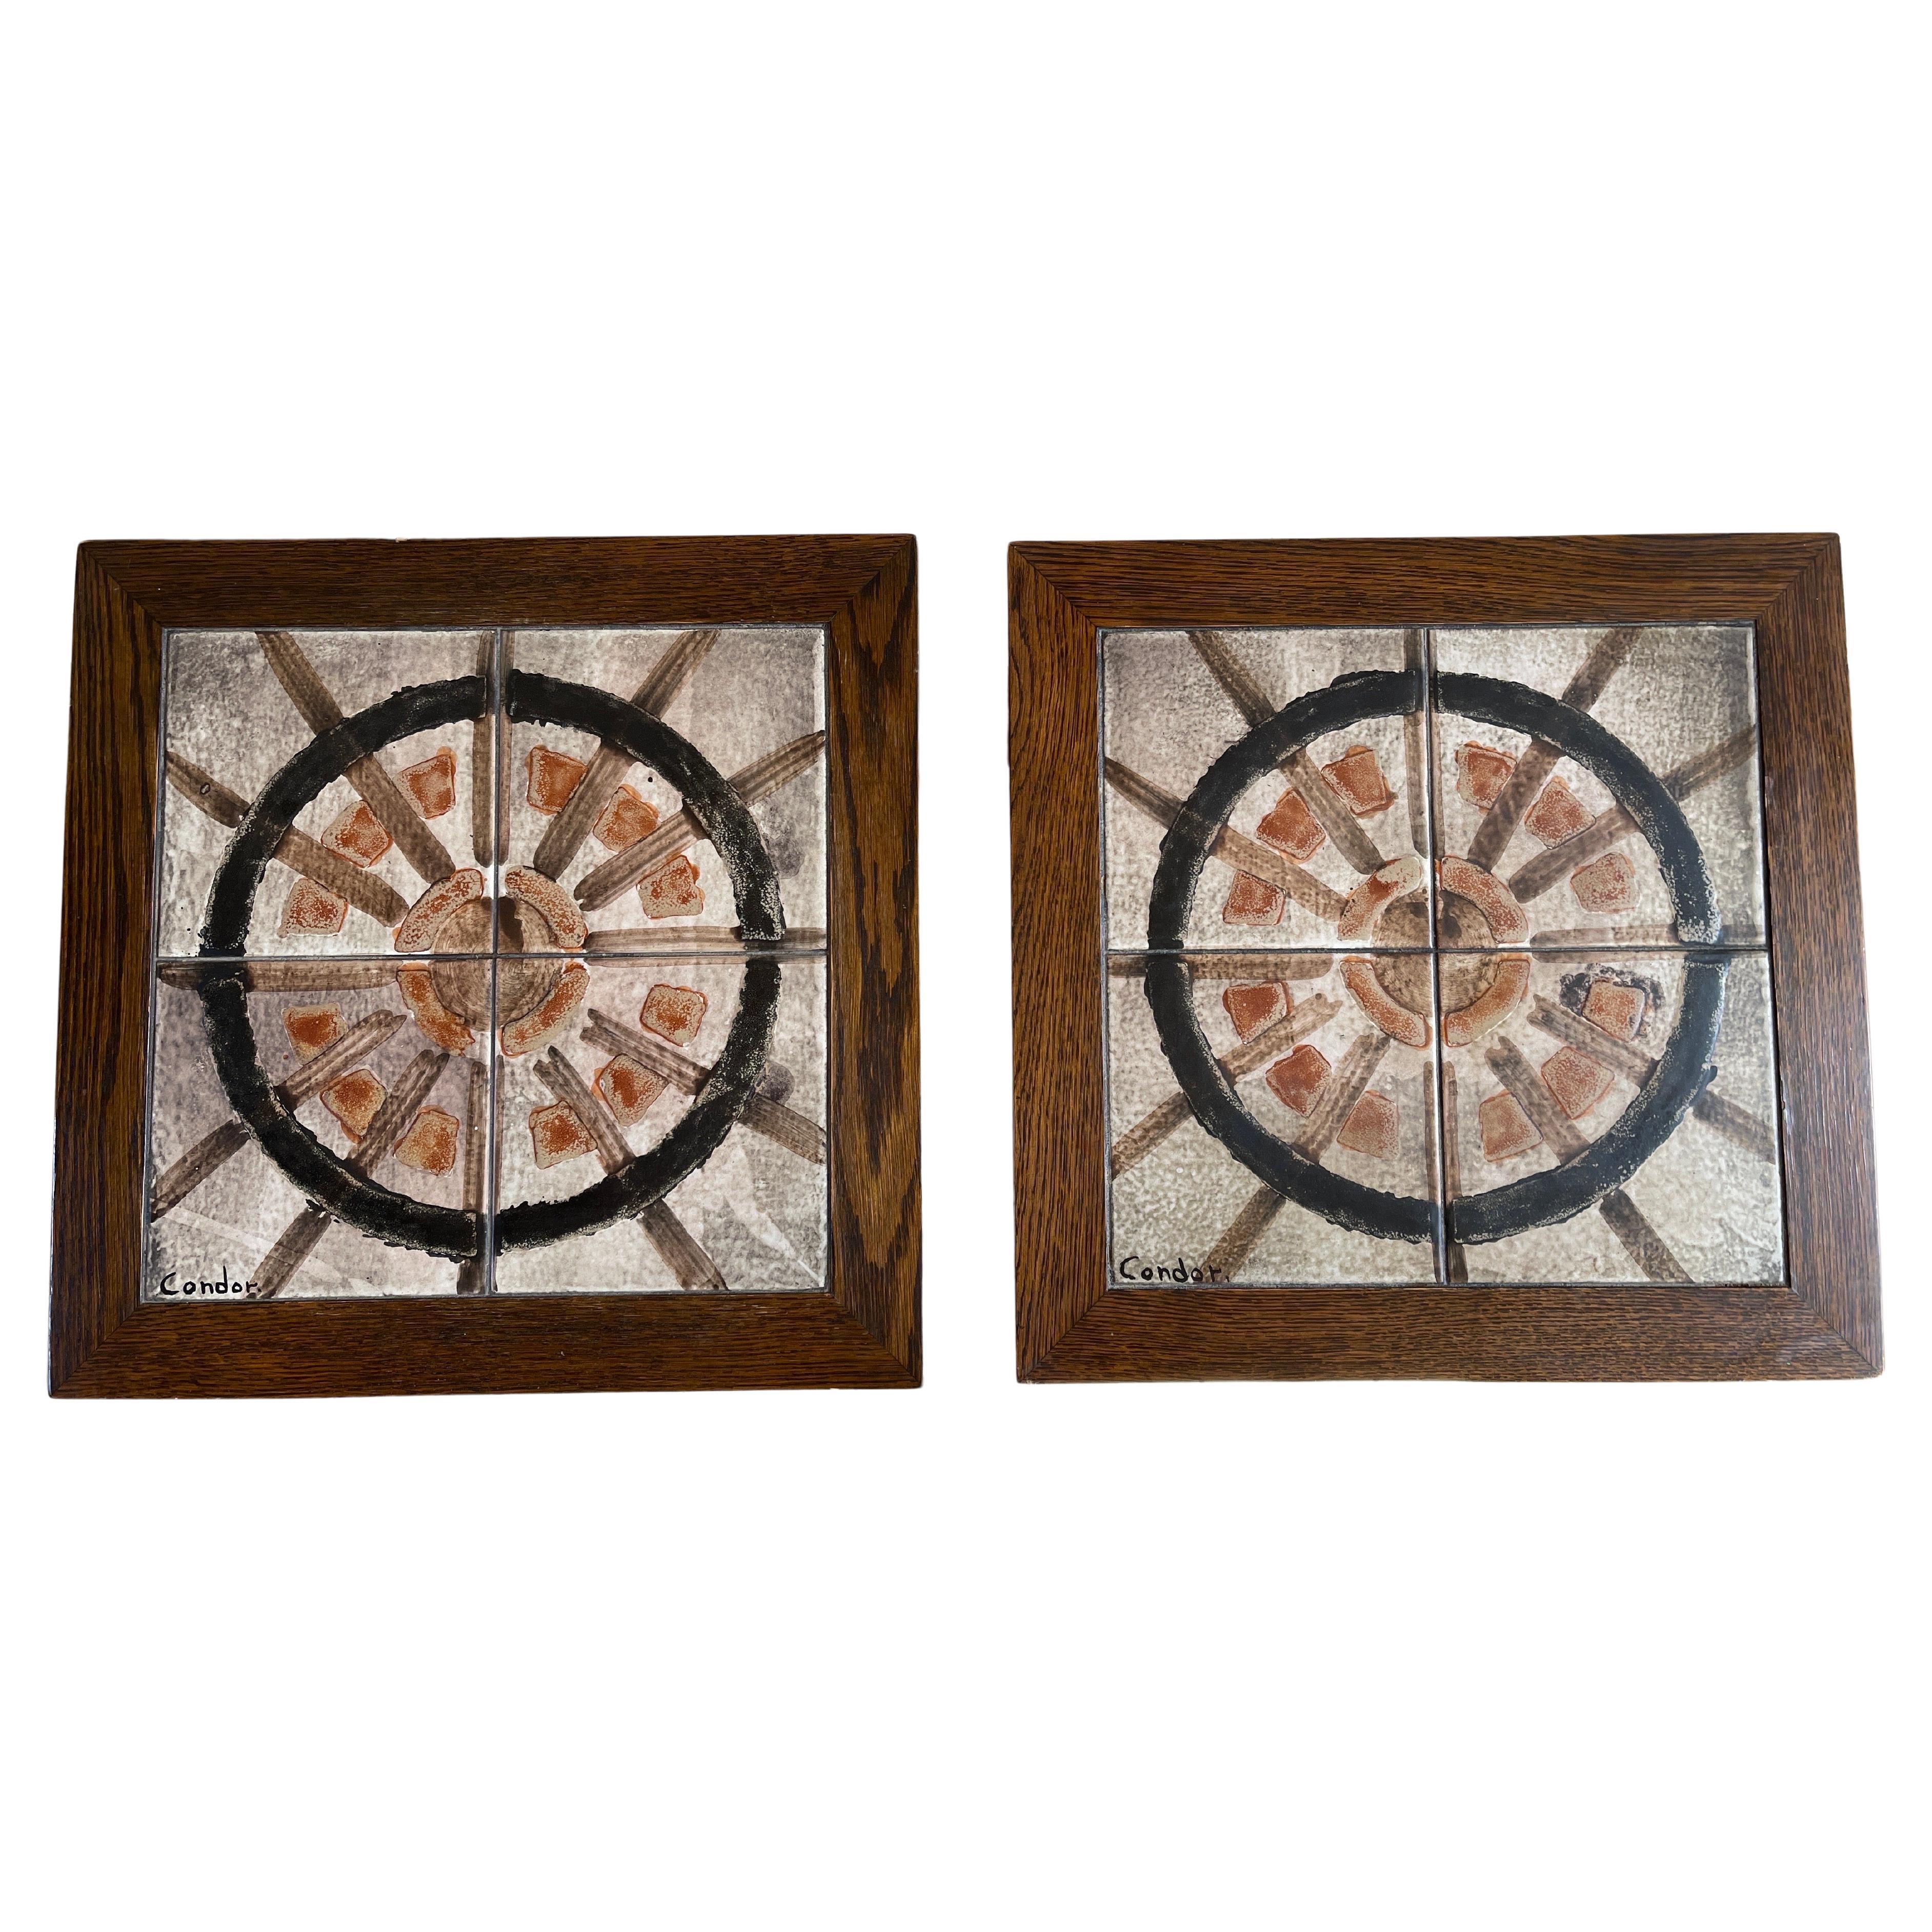 Danish Oak Side Tables With Hand Painted Tile Tops In the Manner of Picasso For Sale